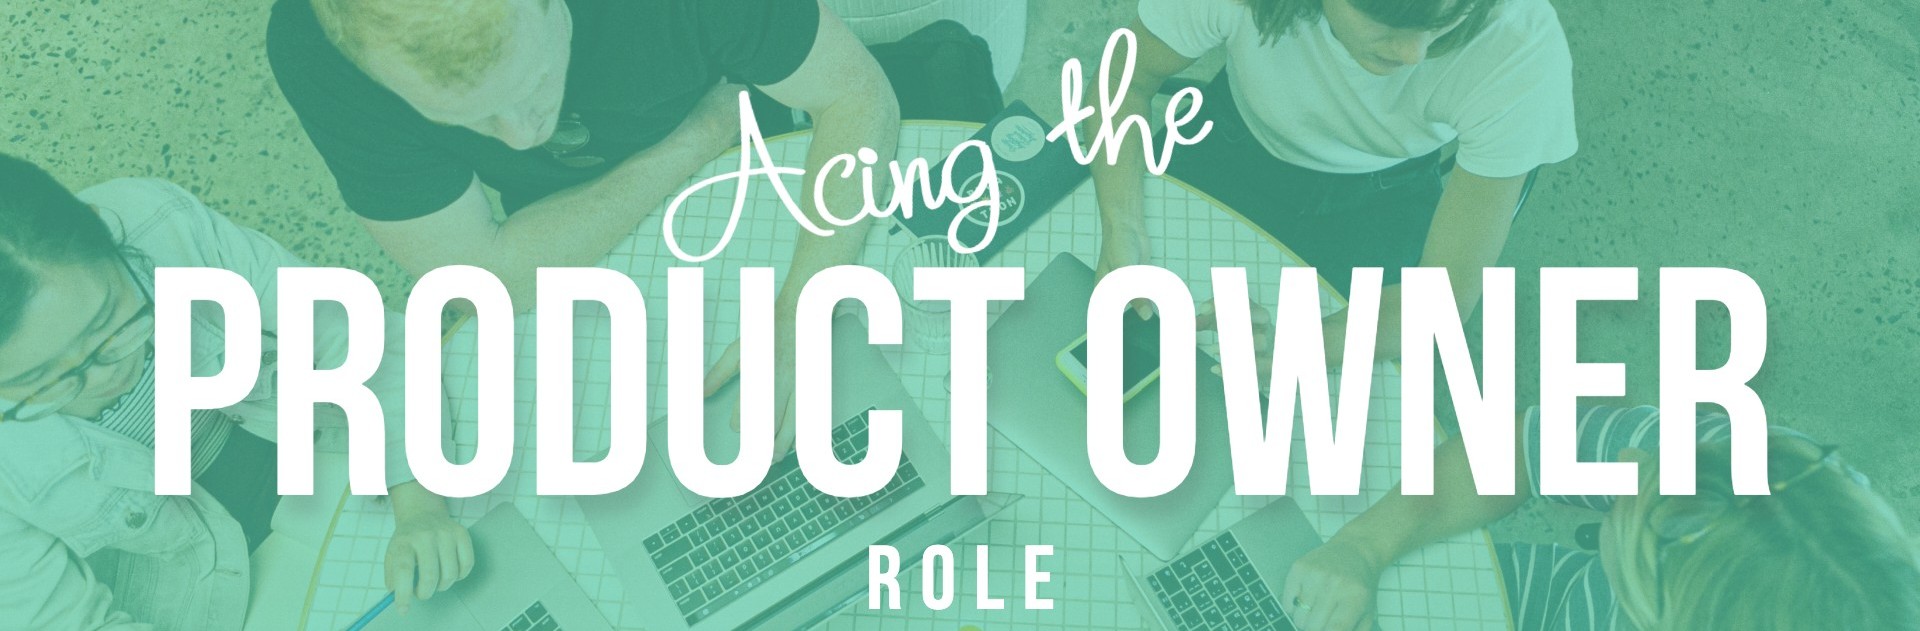 The Product Owner (PO) role. Key Strategies For Success.